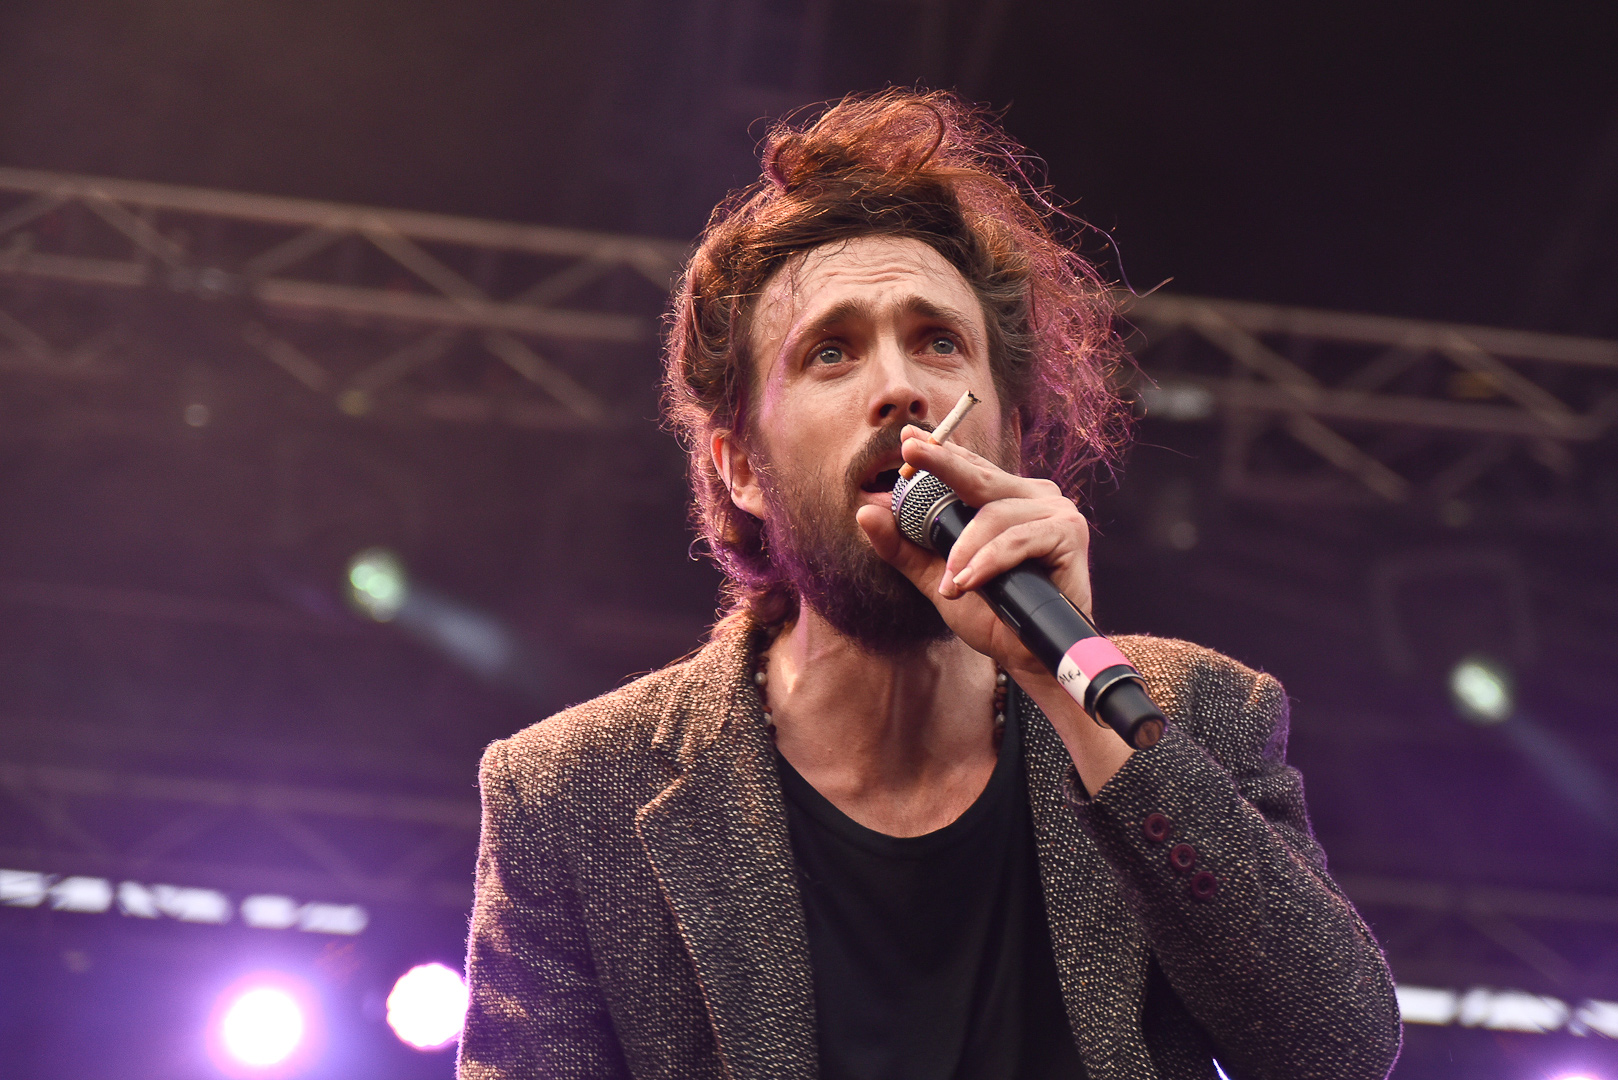 edward-sharpe-and-the-magnetic-zeros-music-wins-festival-tenopolis-13-noviembre-2016-victoria-mourelle-indie-hoy-1811